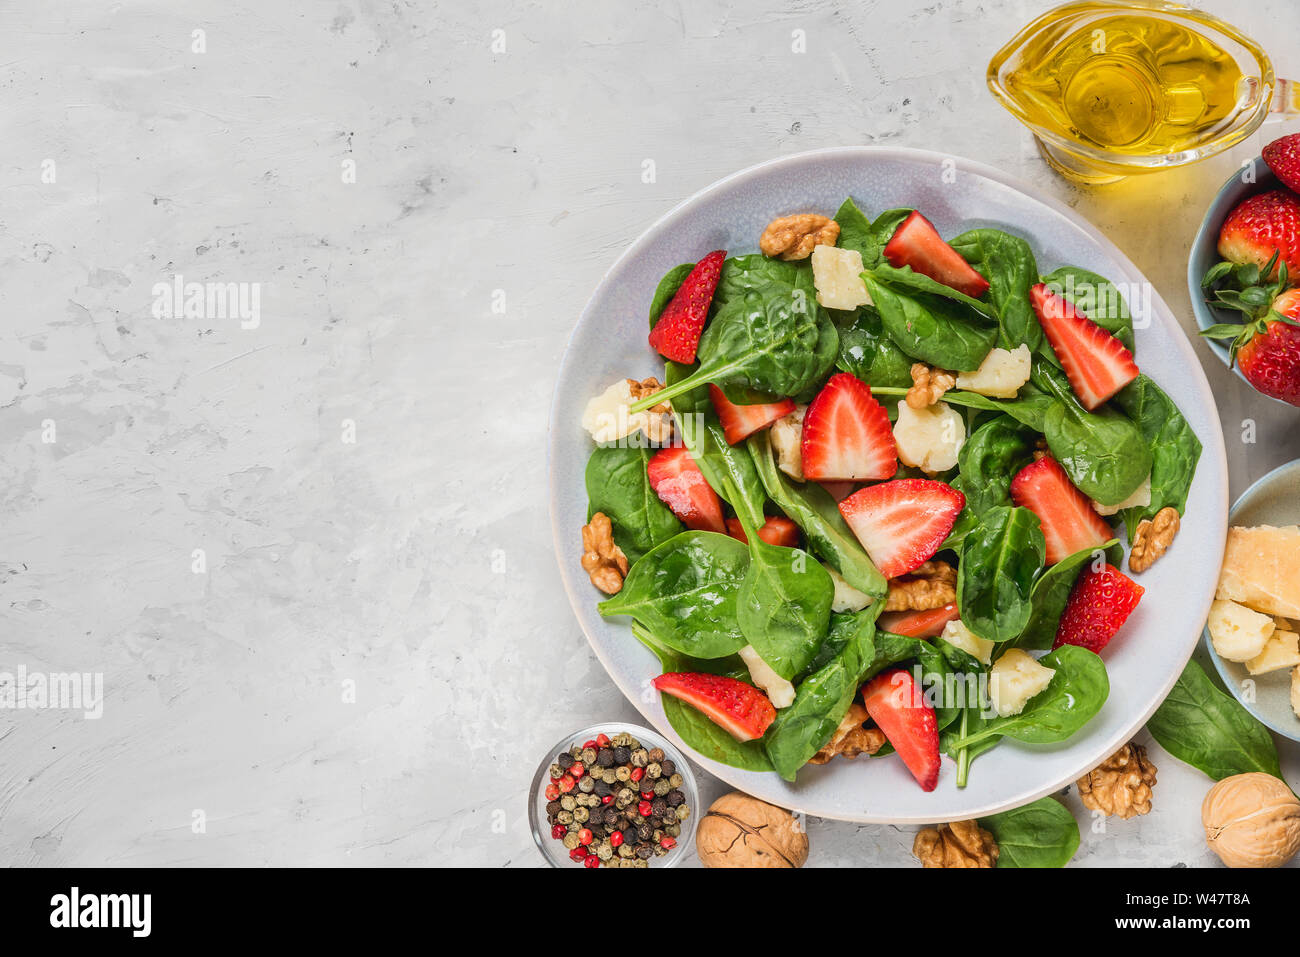 salad with strawberry, spinach leaves, parmesan cheese, olive oil and walnuts on concrete background. healthy diet food. top view with copy space Stock Photo